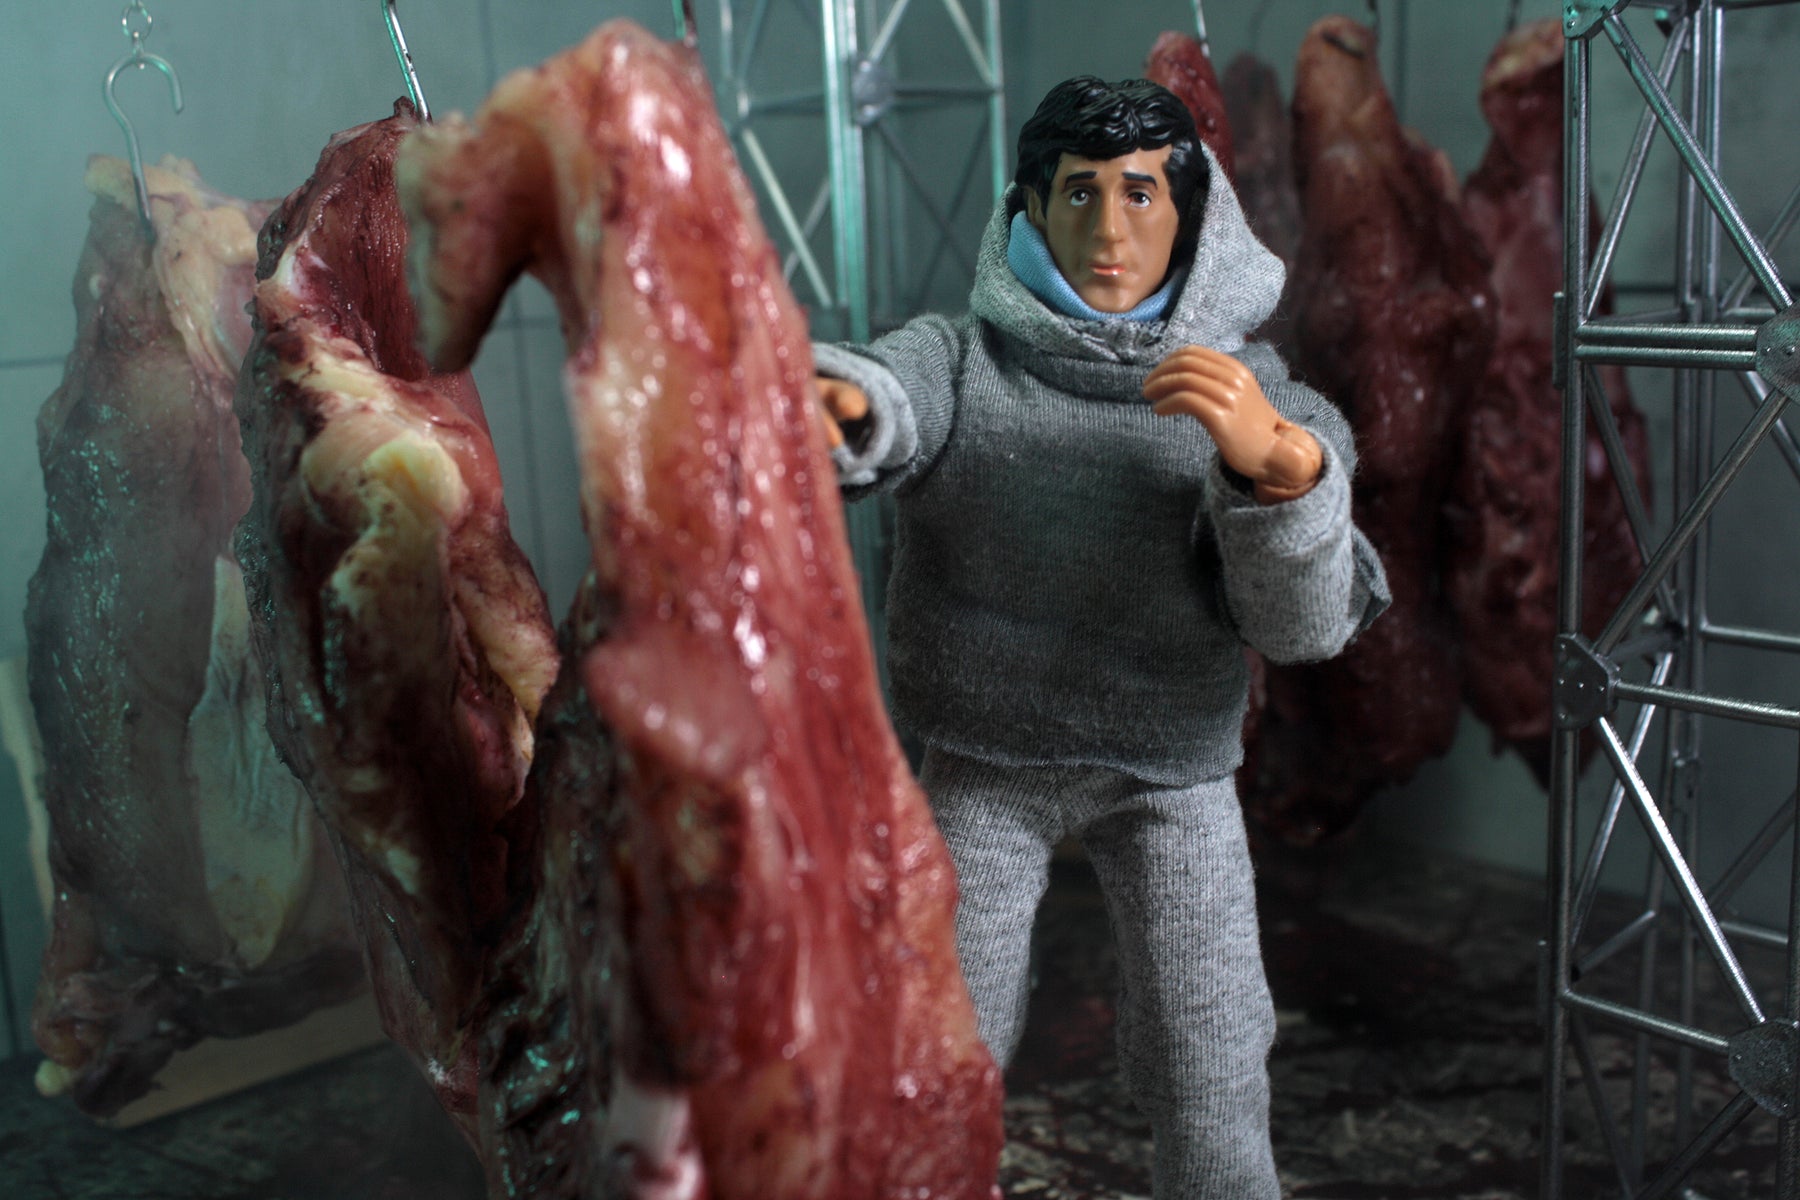 ZLC MEGO Exclusive Rocky Balboa in Training Sweatsuit 8" Action Figure - Zlc Collectibles